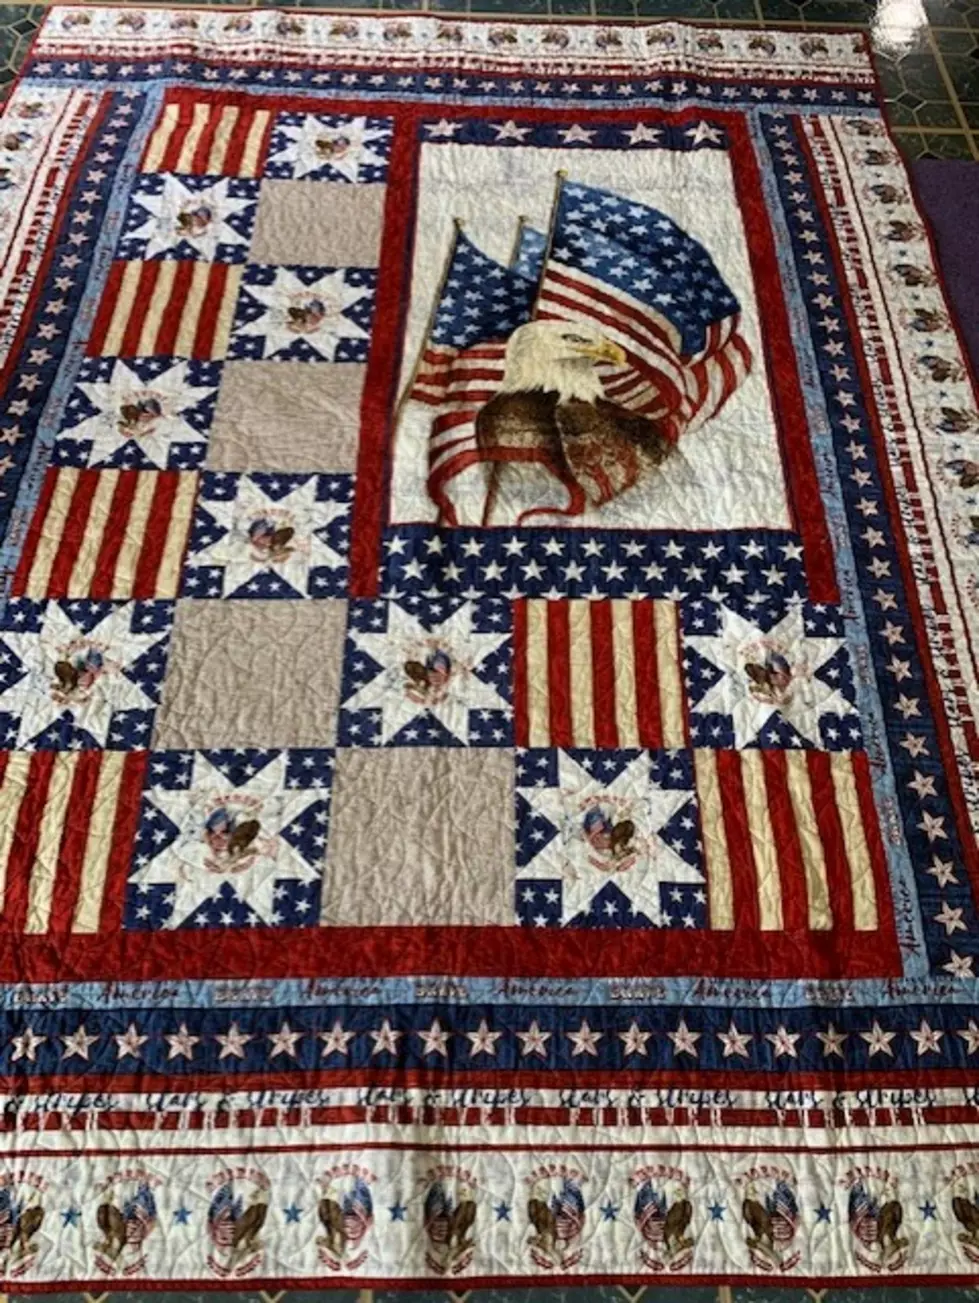 Local Veteran’s to be Honored With Quilt of Valor